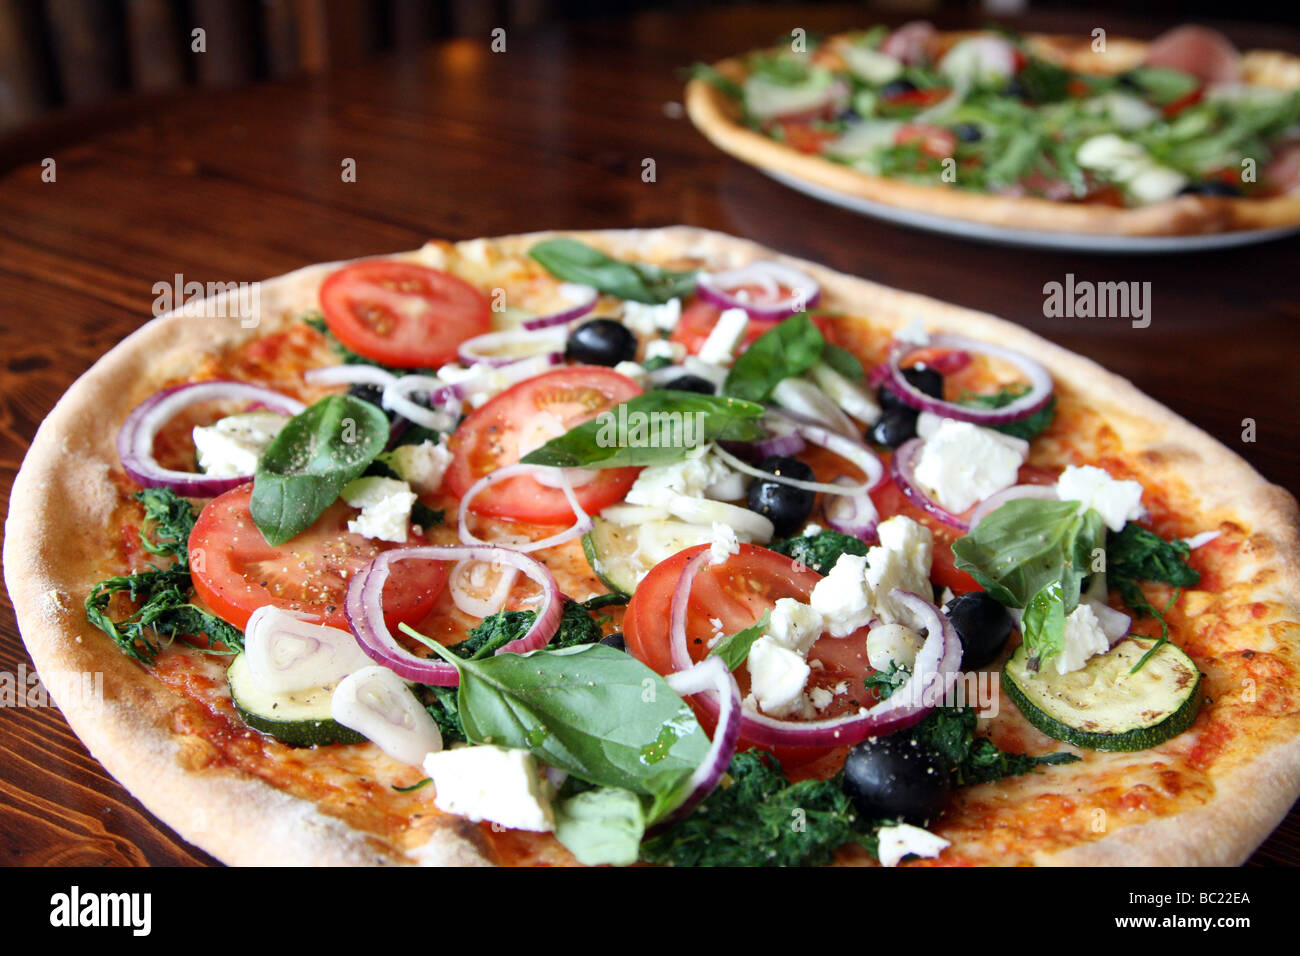 Pizzas topped with delicious looking vegetables. Stock Photo